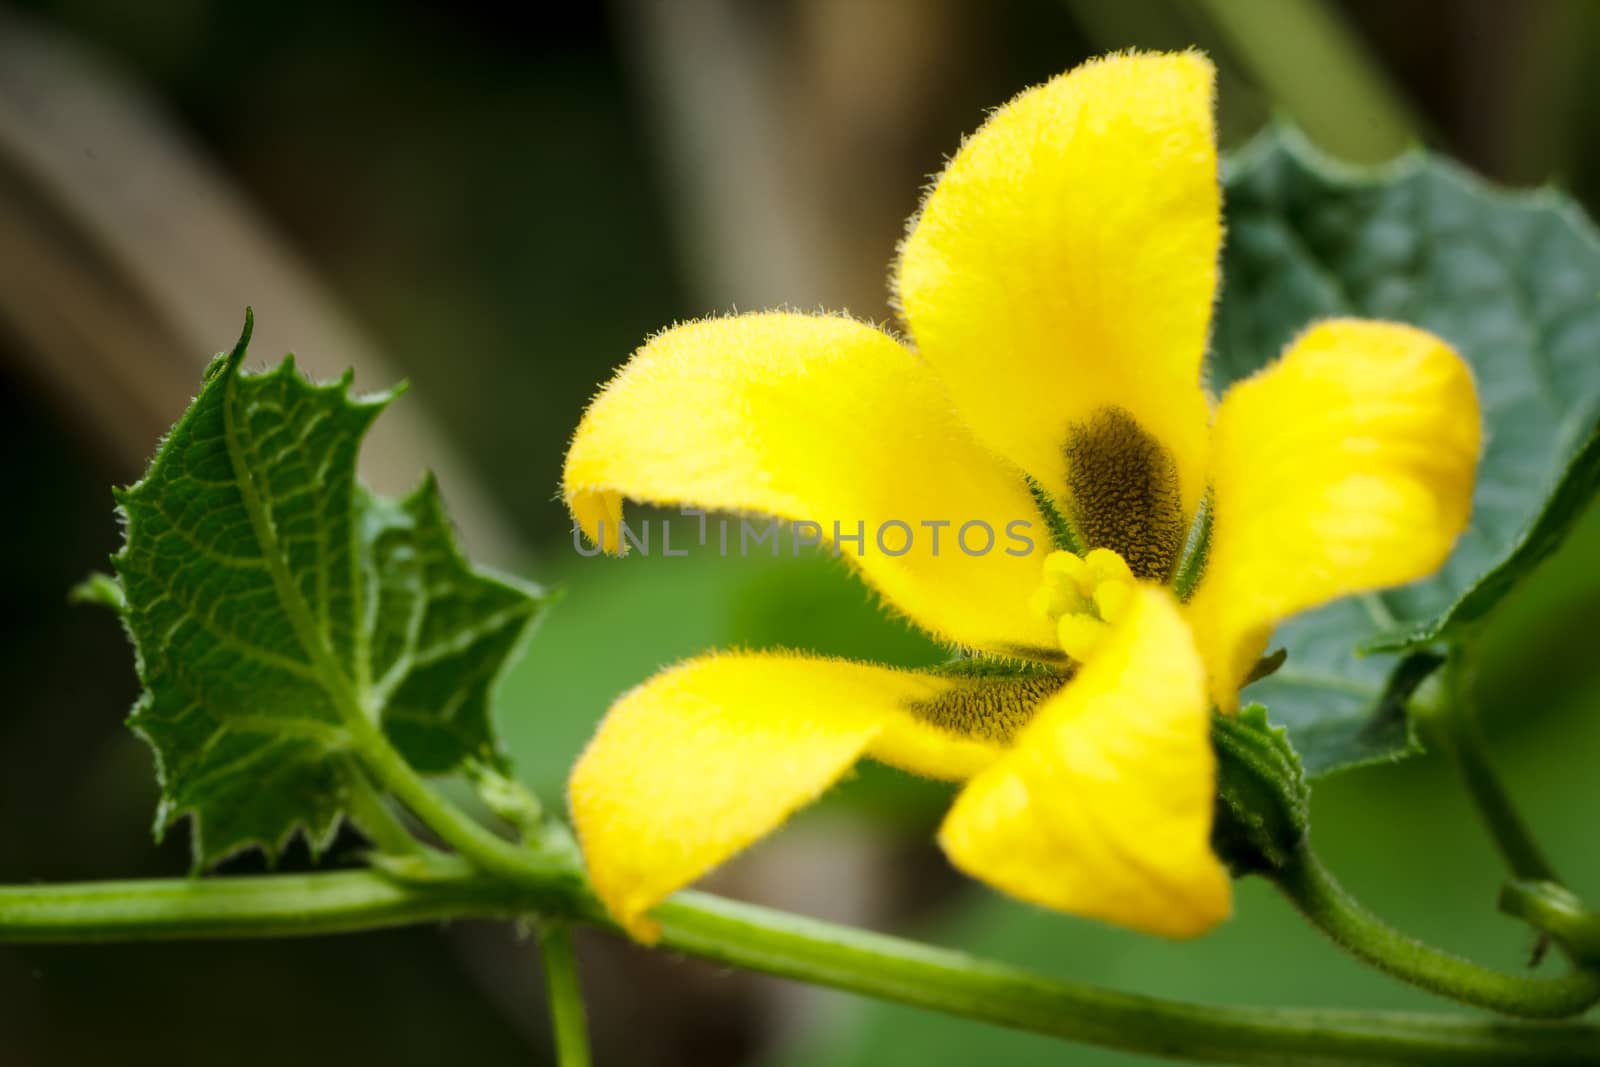 leaves and flower of ripe cucumber fruit